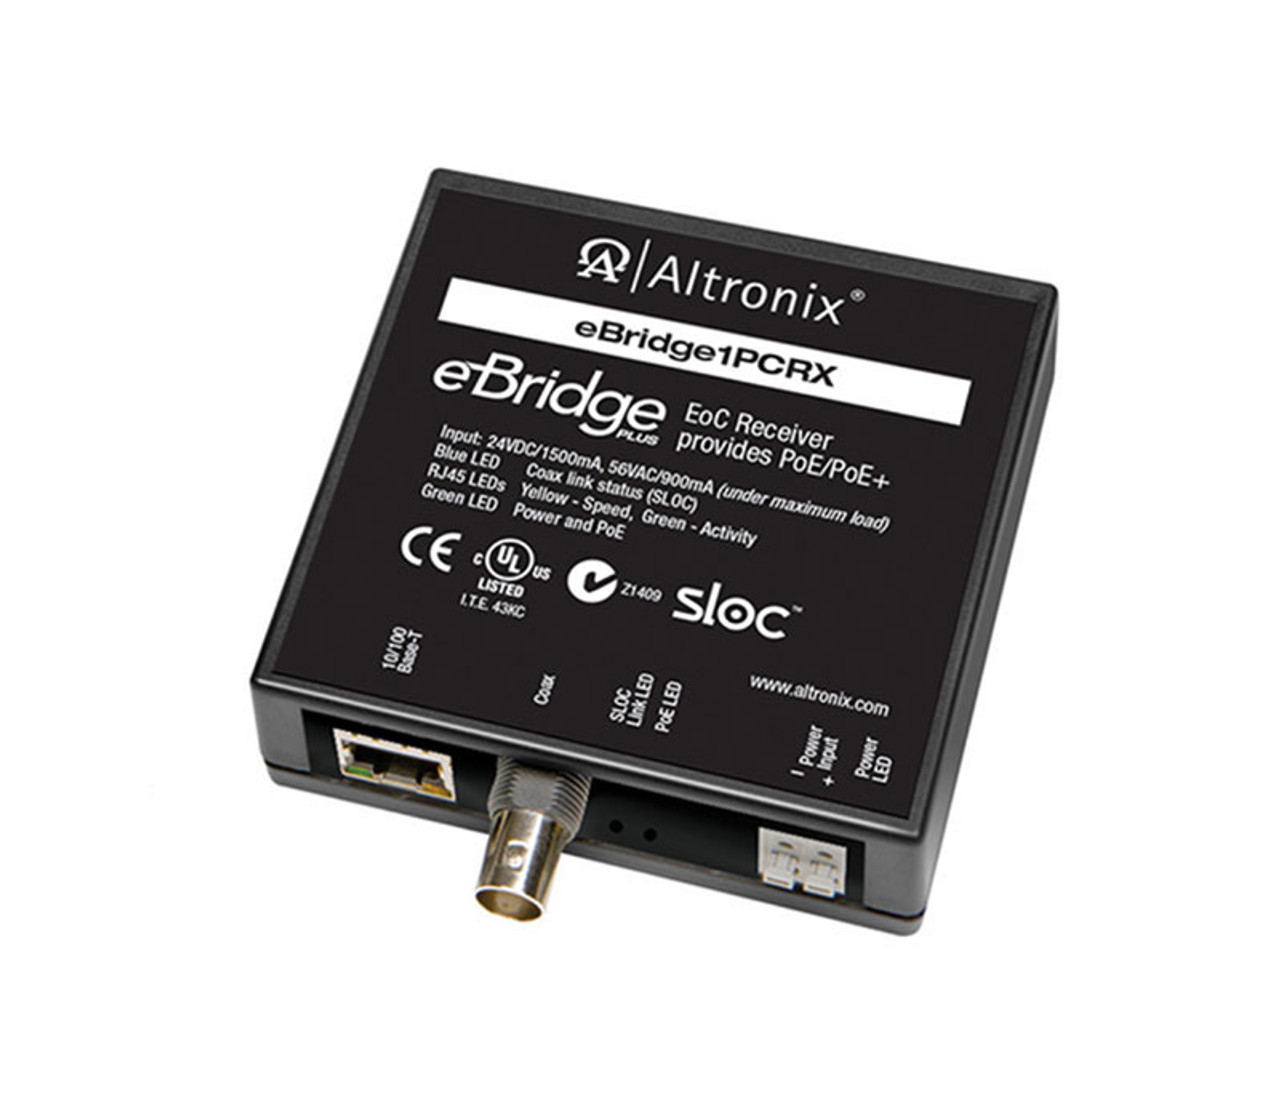 Altronix EBRIDGE1PCTX Power Supply IP and PoE/PoE+ over Coax Hardened  Transceiver Powered by Receiver Distance: up to 100m